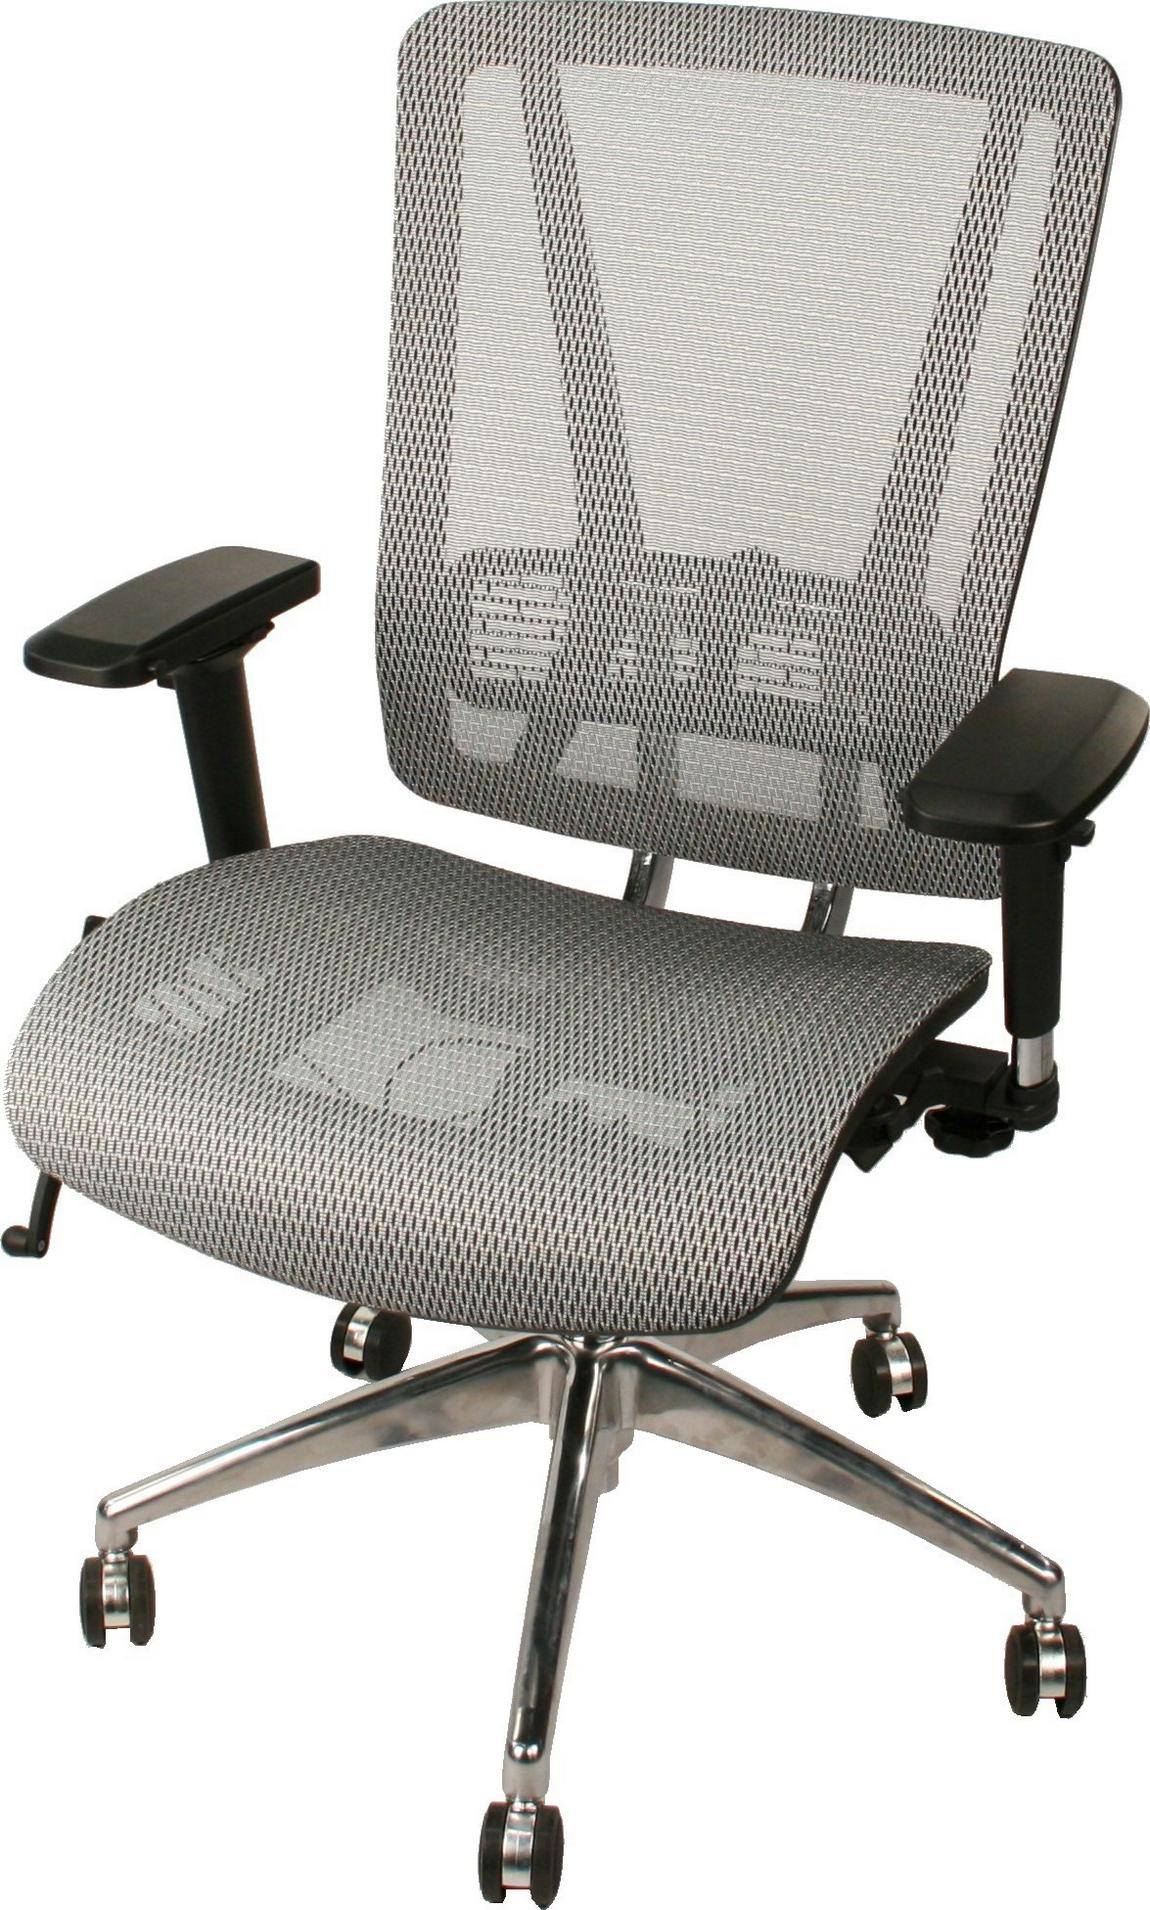 866 Silver Full Mesh Seat And Mesh Back Chair 1 